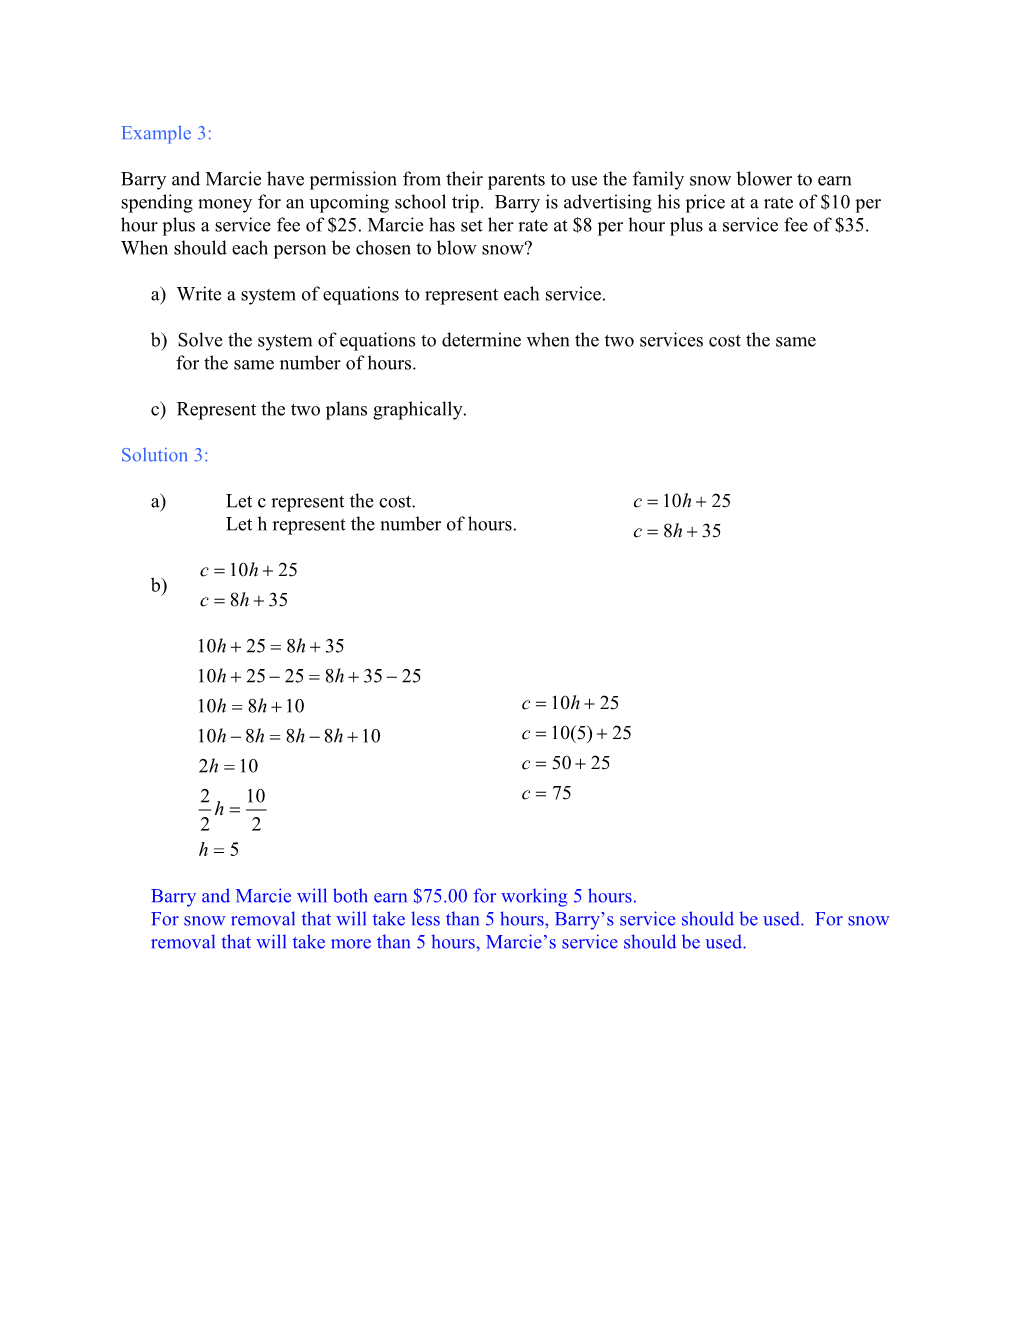 Systems of Linear Equations s1